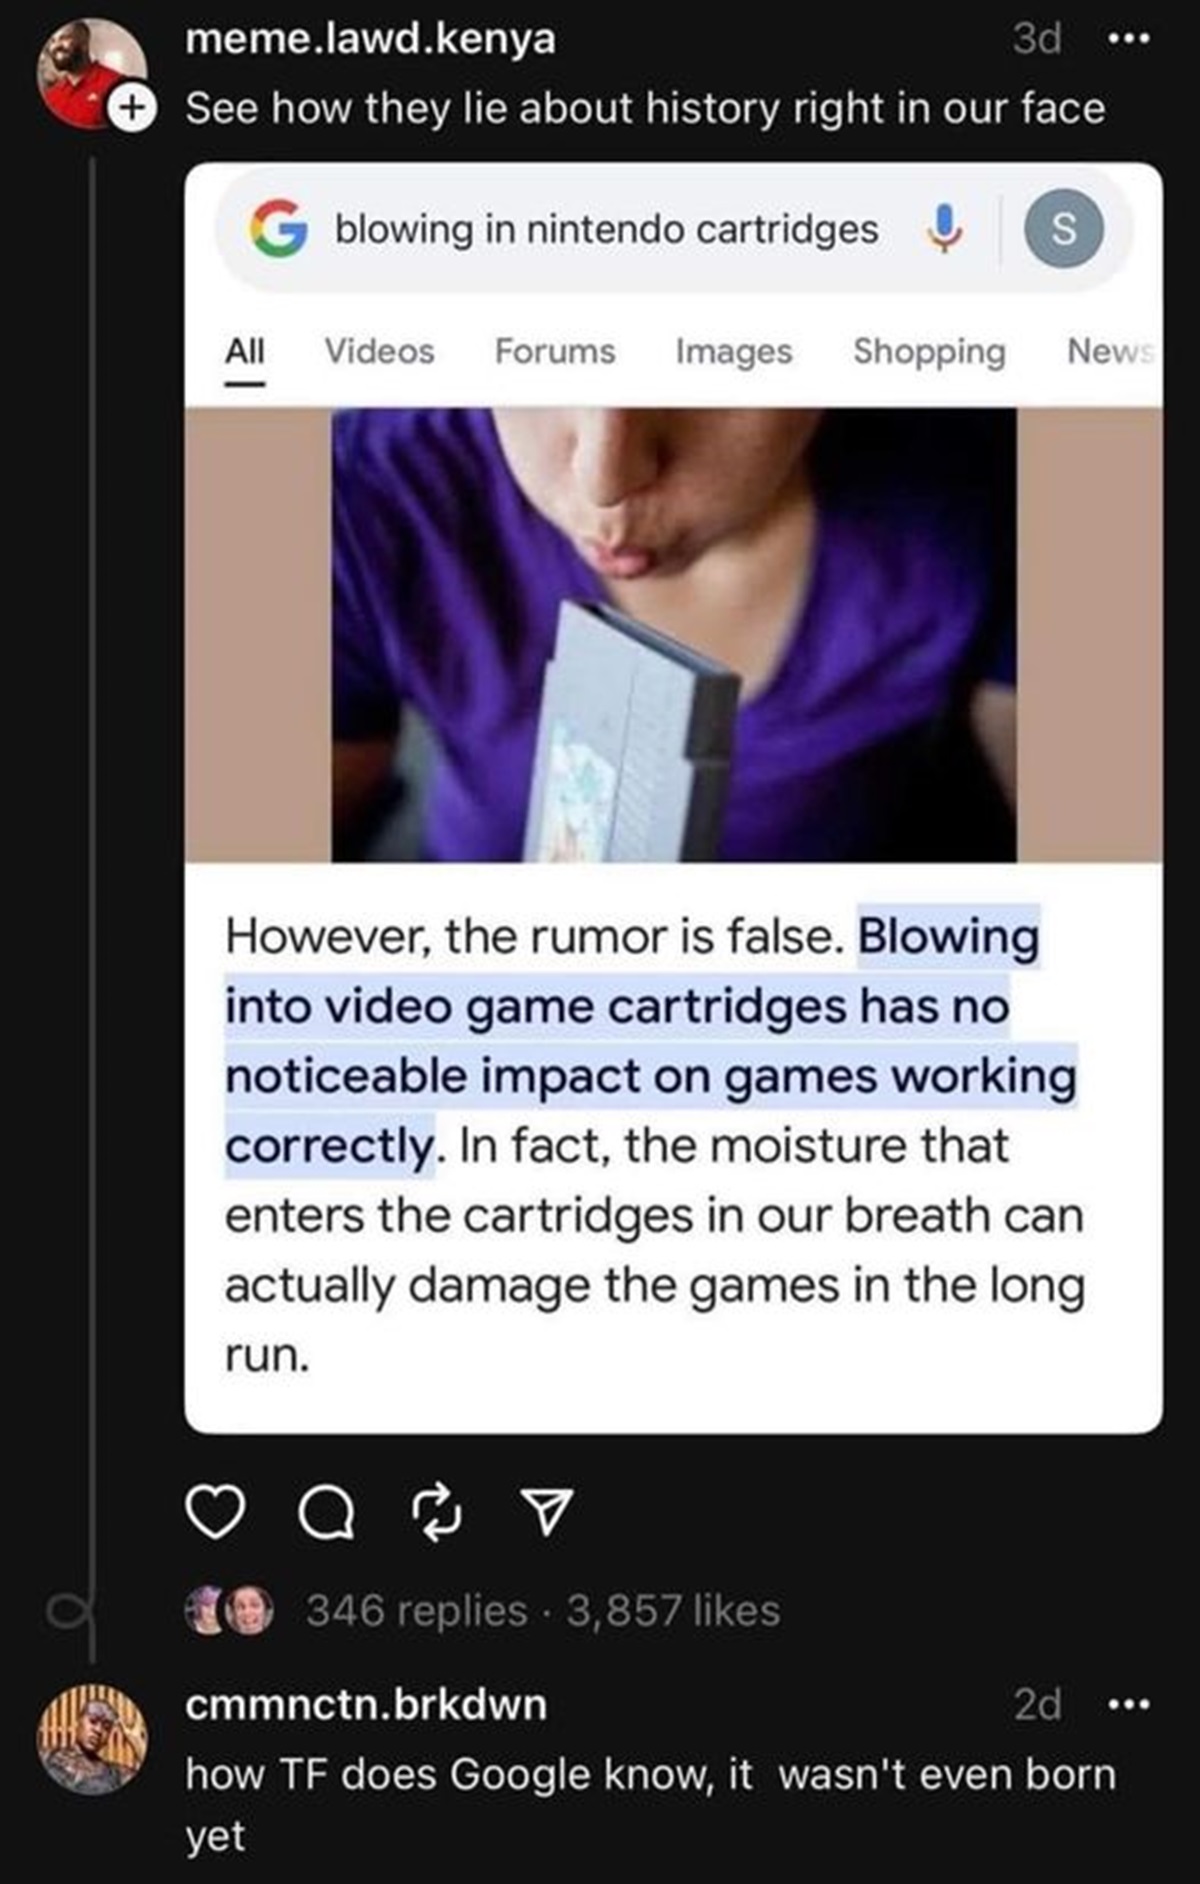 screenshot - meme.lawd.kenya 3d See how they lie about history right in our face blowing in nintendo cartridges All Videos Forums Images Shopping S News However, the rumor is false. Blowing into video game cartridges has no noticeable impact on games work